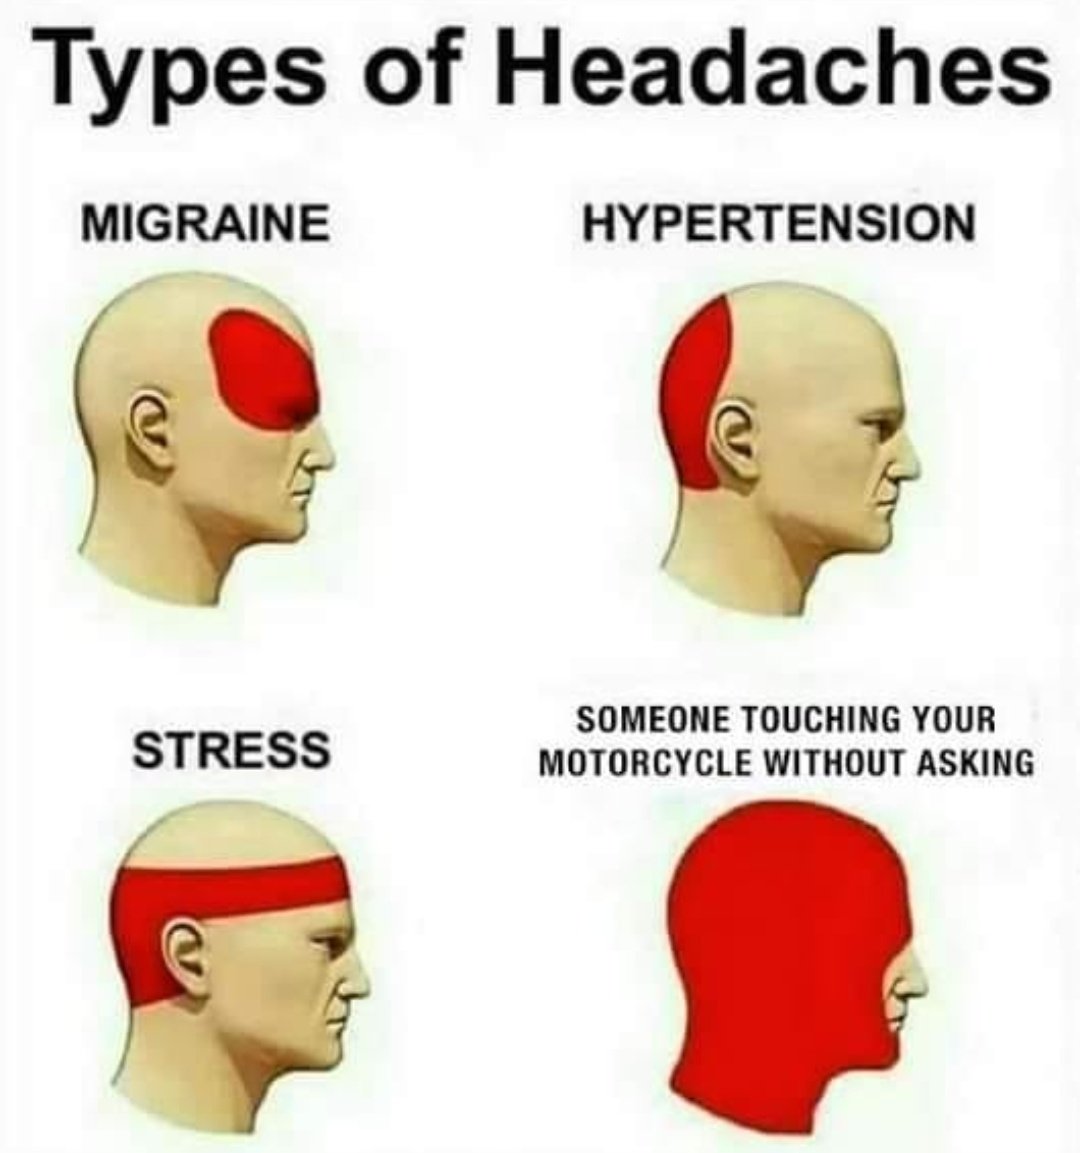 Afternoon motorcycle funny snort* meme.

🗣️🤯🐽

*I'll admit it, I snort laughed at this one myself.

#motorcycle #hypertension #stress #stressmanagement #funny #Memes #headache